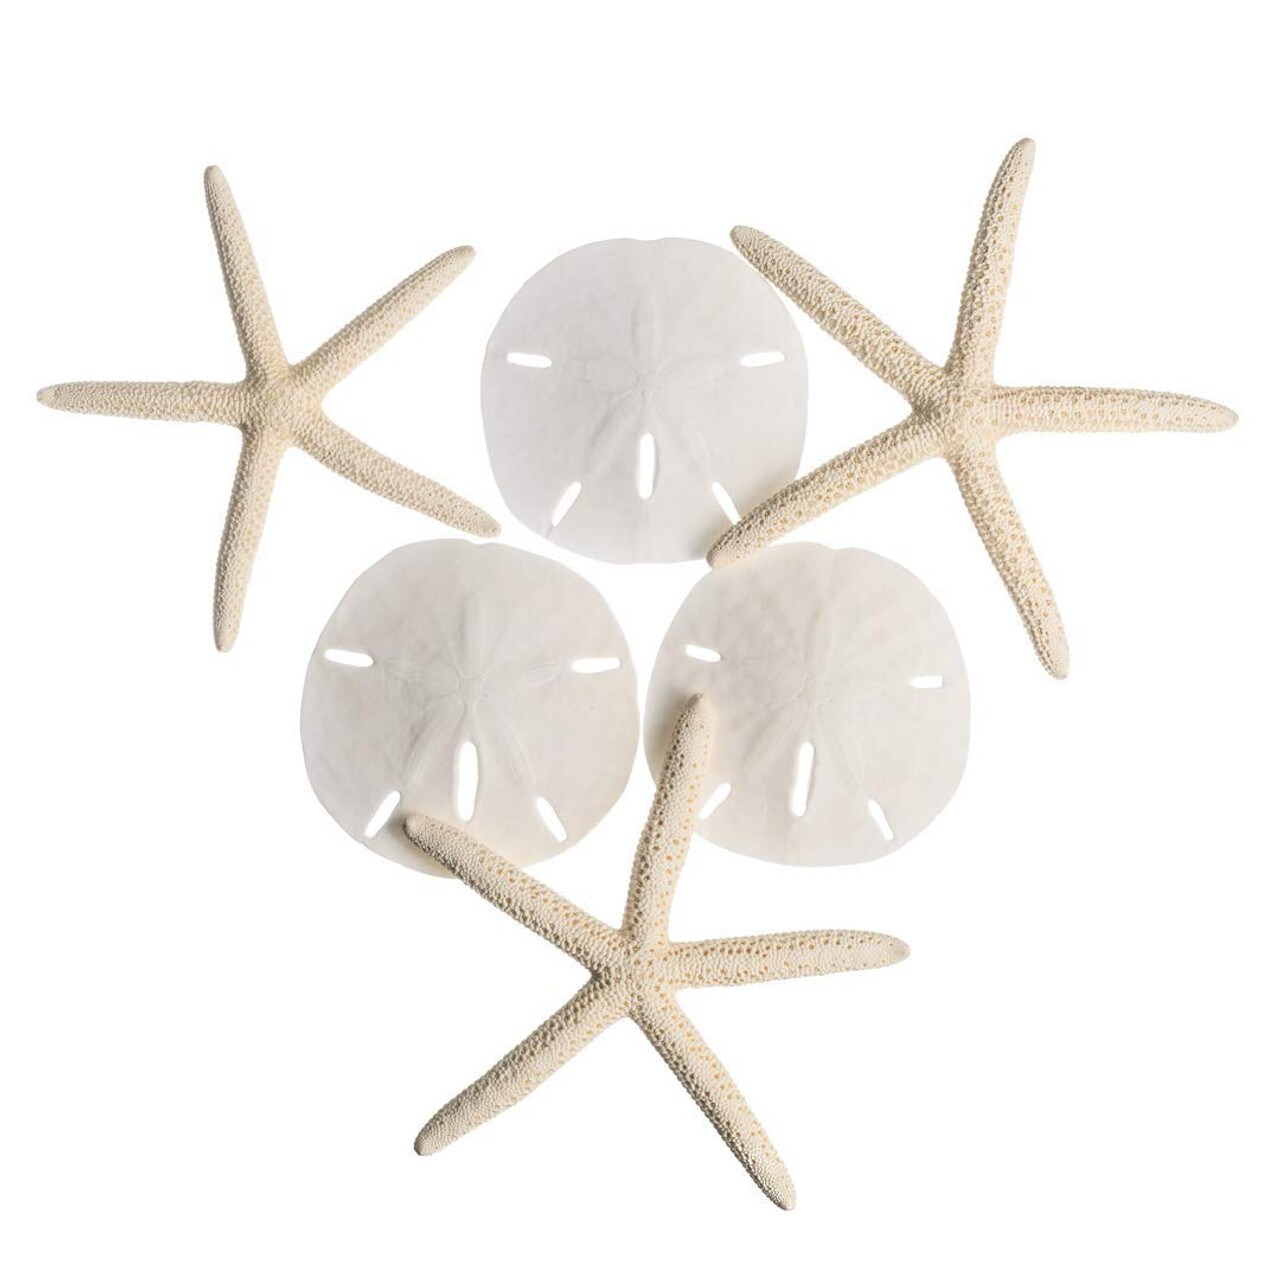 Starfish Mix 3 White Finger Starfish and 3 Sand Dollars for Crafts and Decor